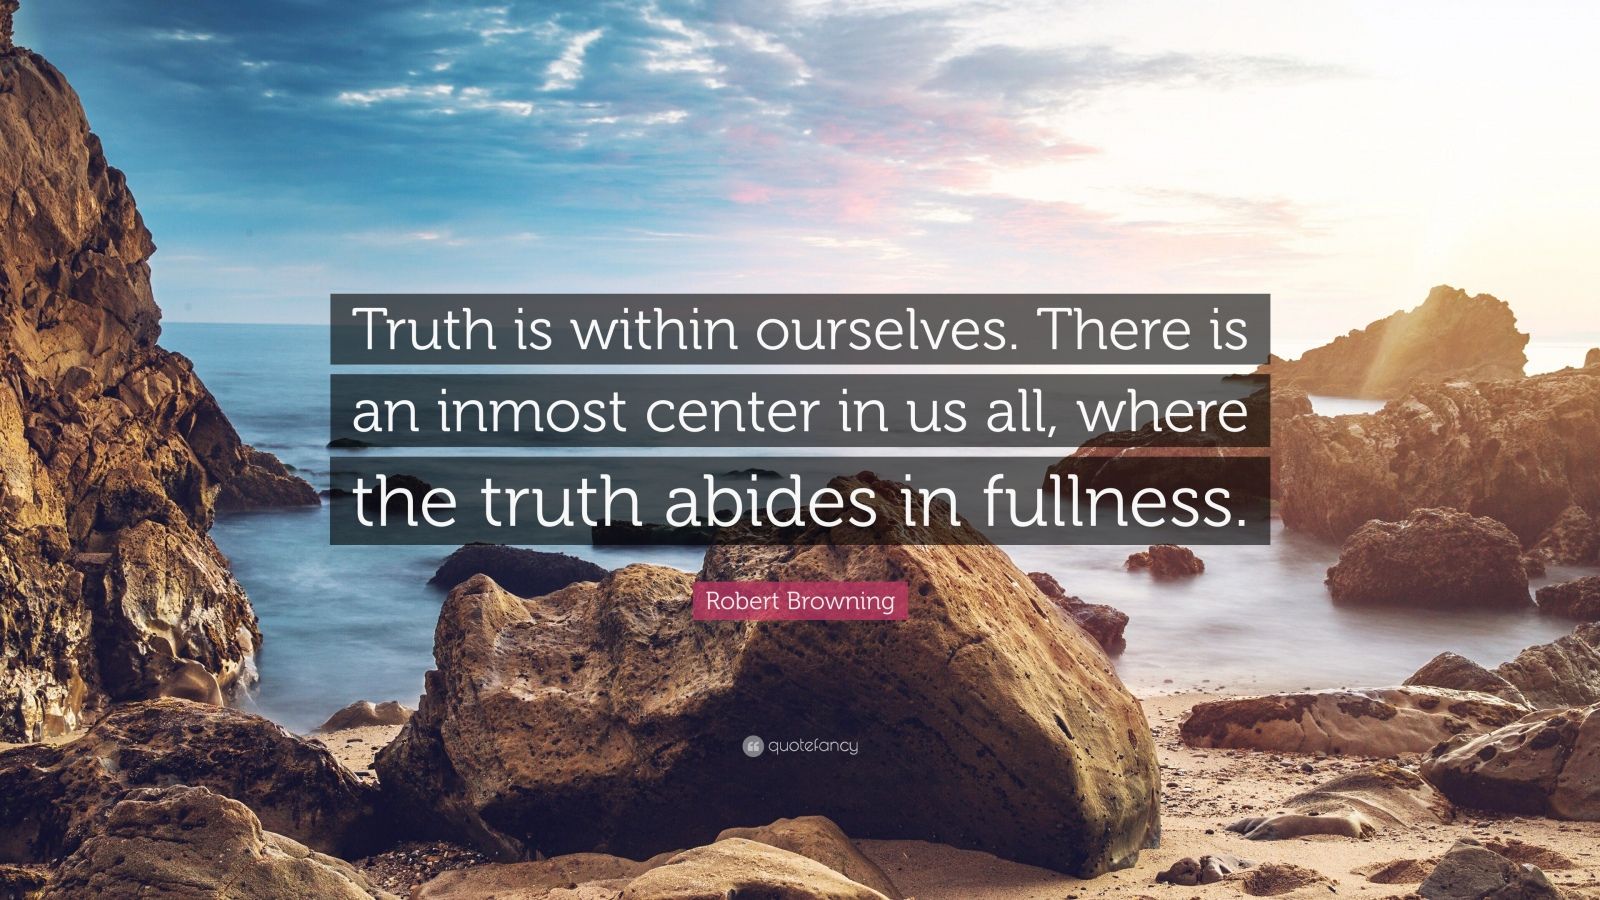 Robert Browning Quote “truth Is Within Ourselves There Is An Inmost Center In Us All Where